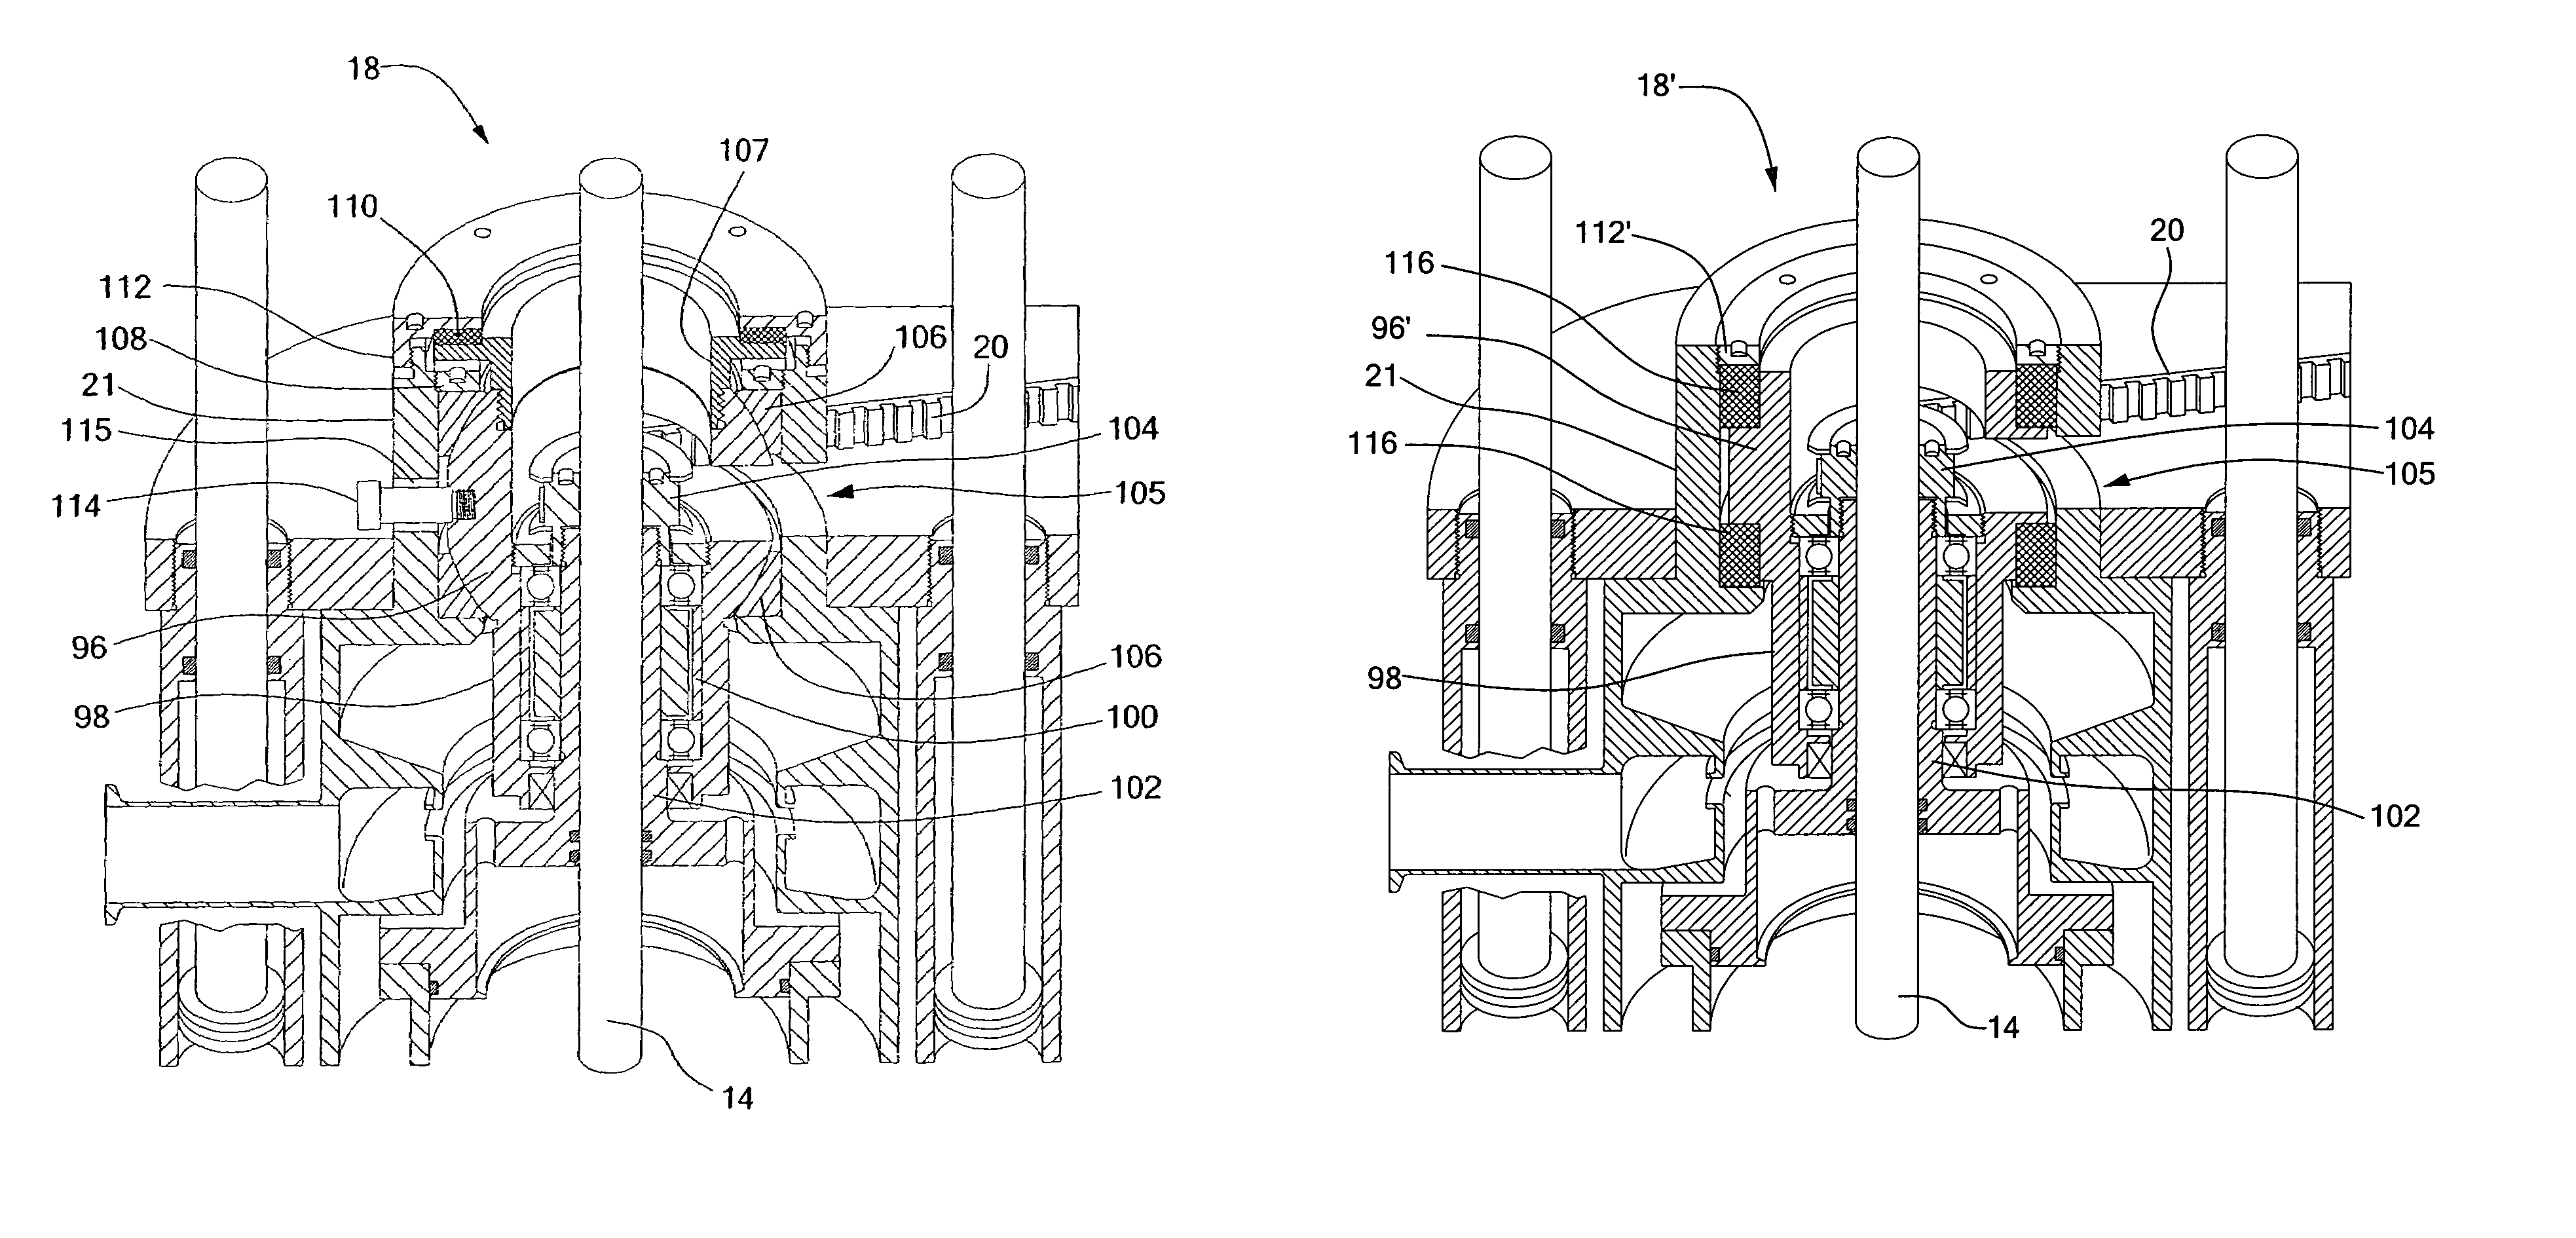 Centrifugal separator with scraper or piston for discharging solids